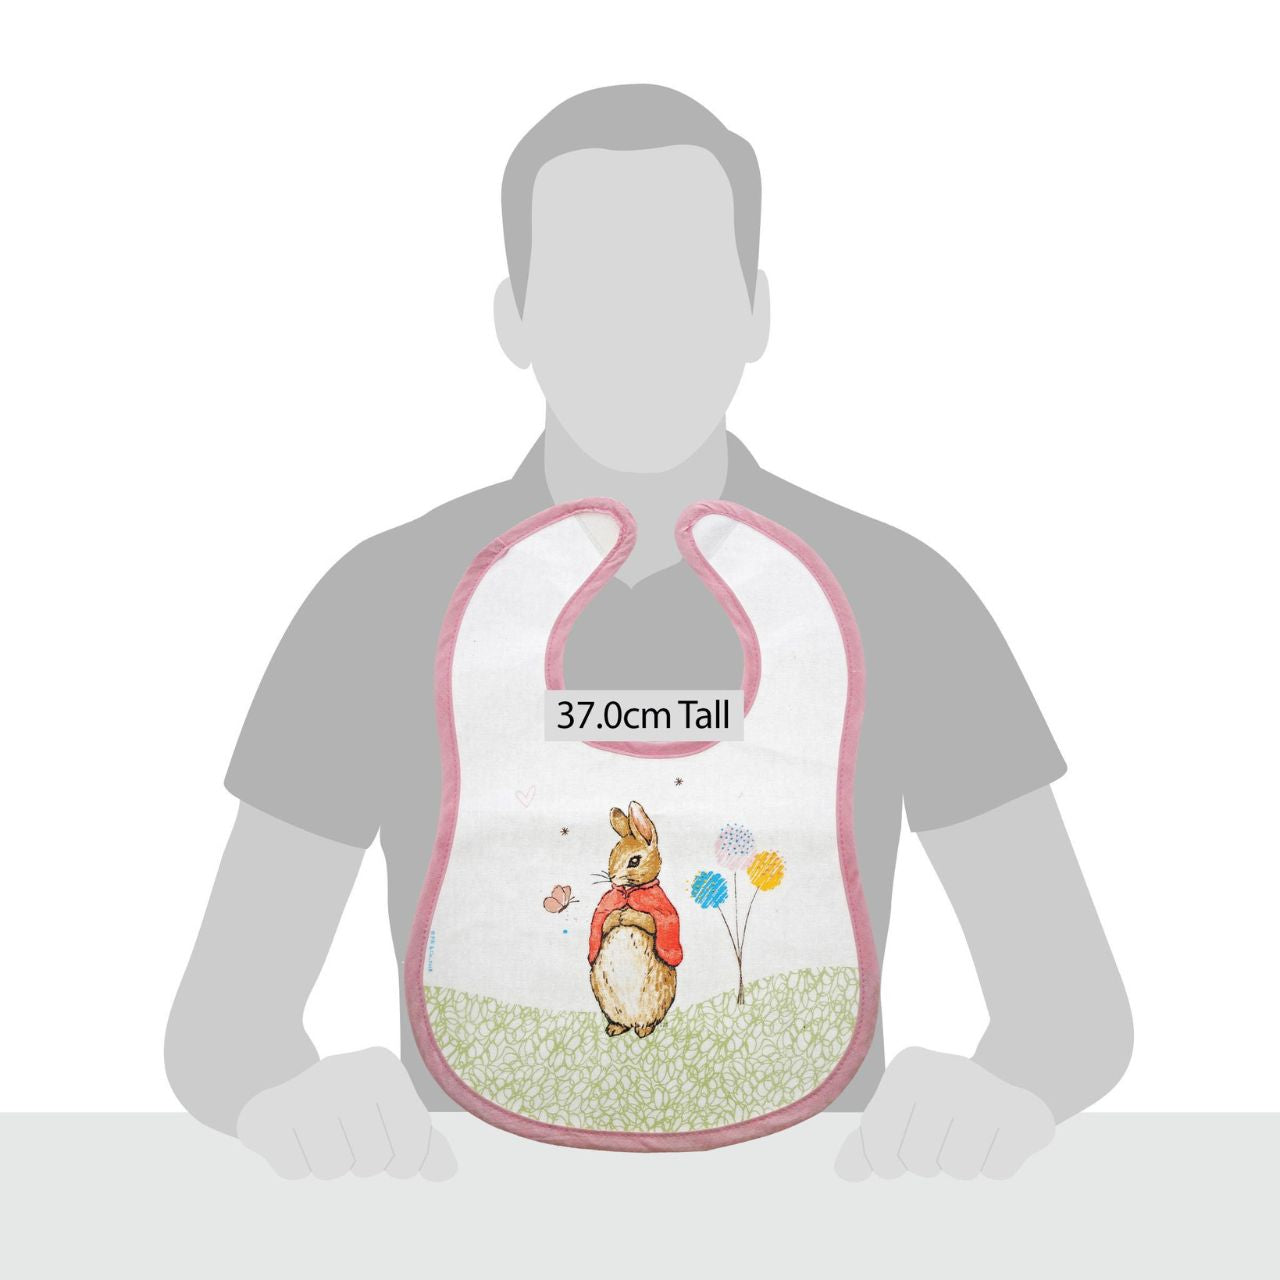 Beatrix Potter Flopsy Children’s Bib  Make mealtimes super fun with this beautiful Flopsy Bib. This is a fun and practical bib, has been perfectly detailed with original Flopsy illustrations, taken from the Beatrix Potter stories.